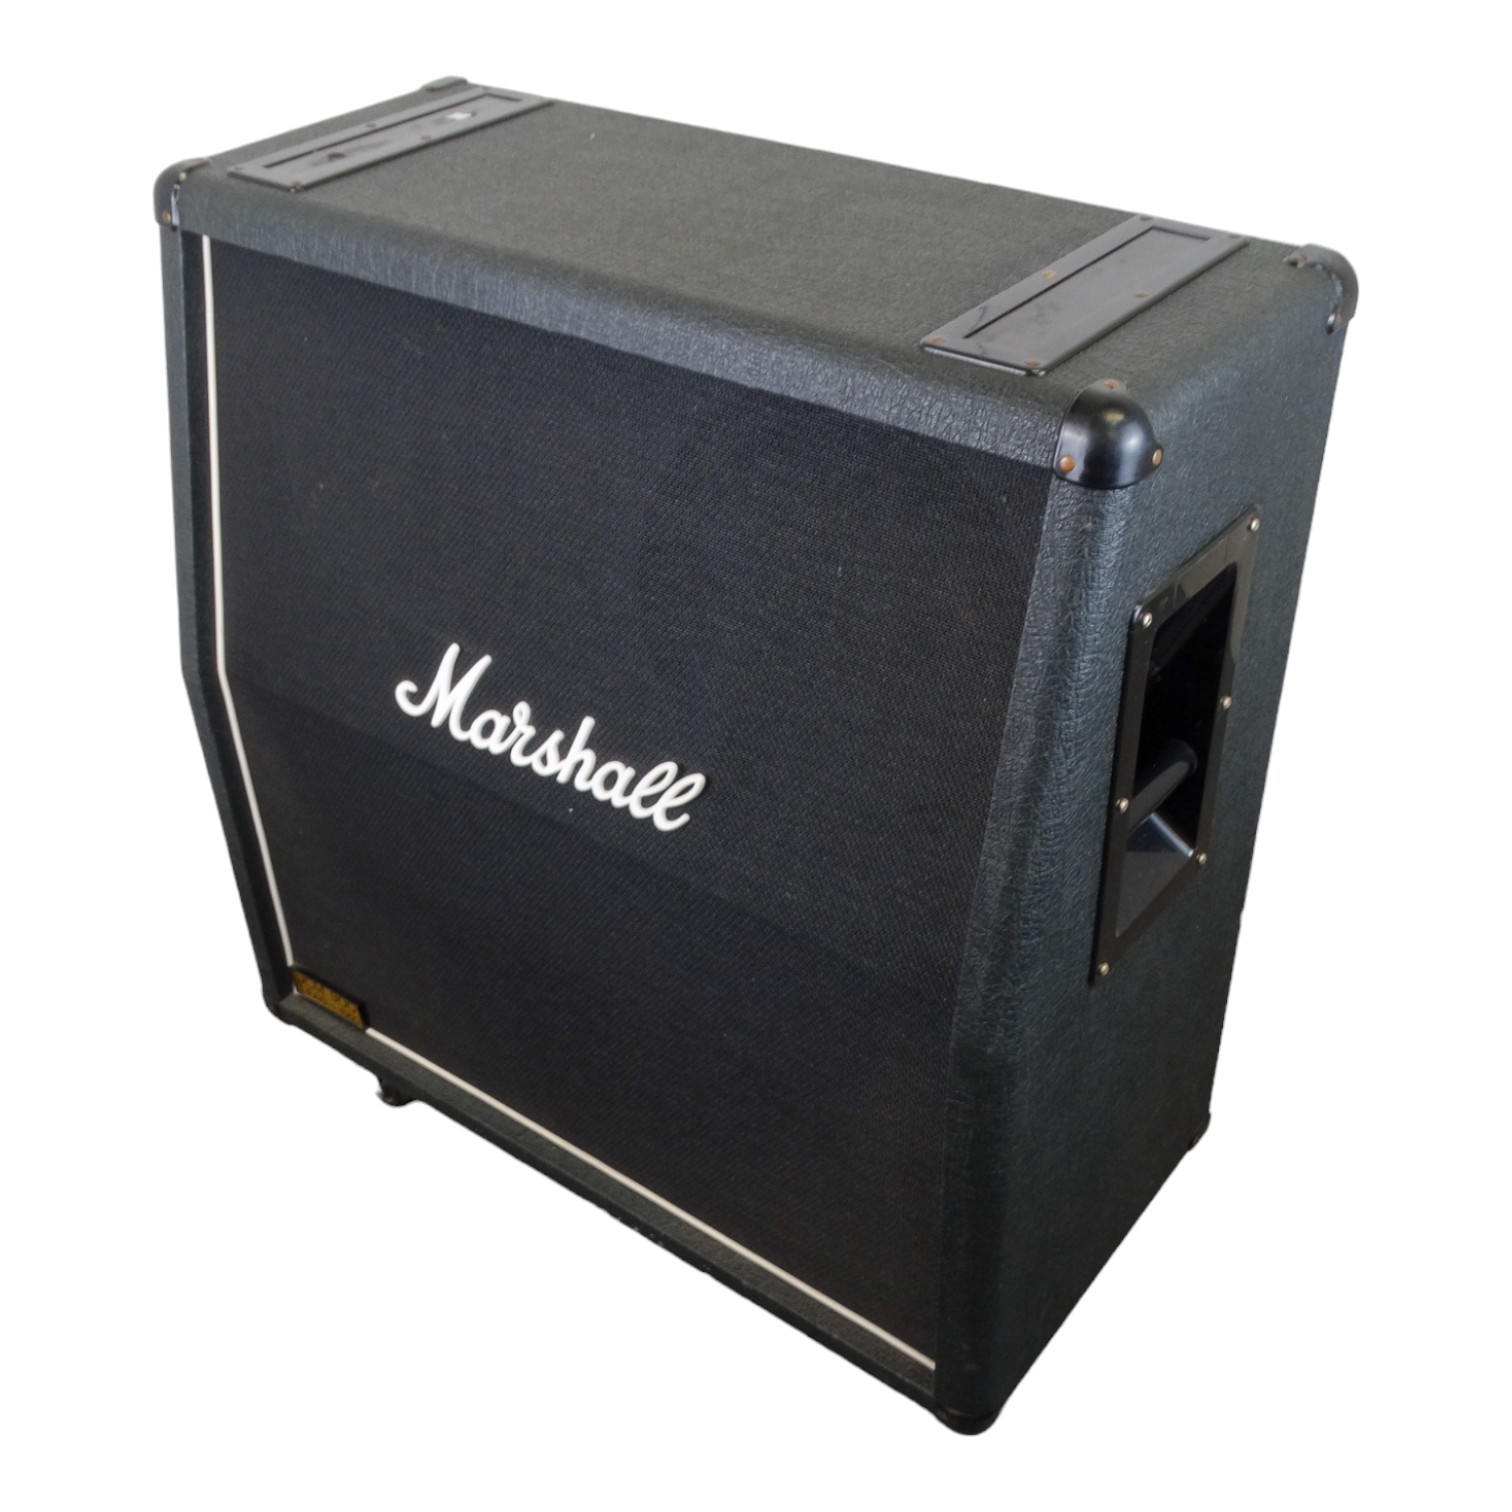 A Marshall lead amplifier speaker - JMC 900, circa 1990's in a re-issue '60's style. - Bild 3 aus 6